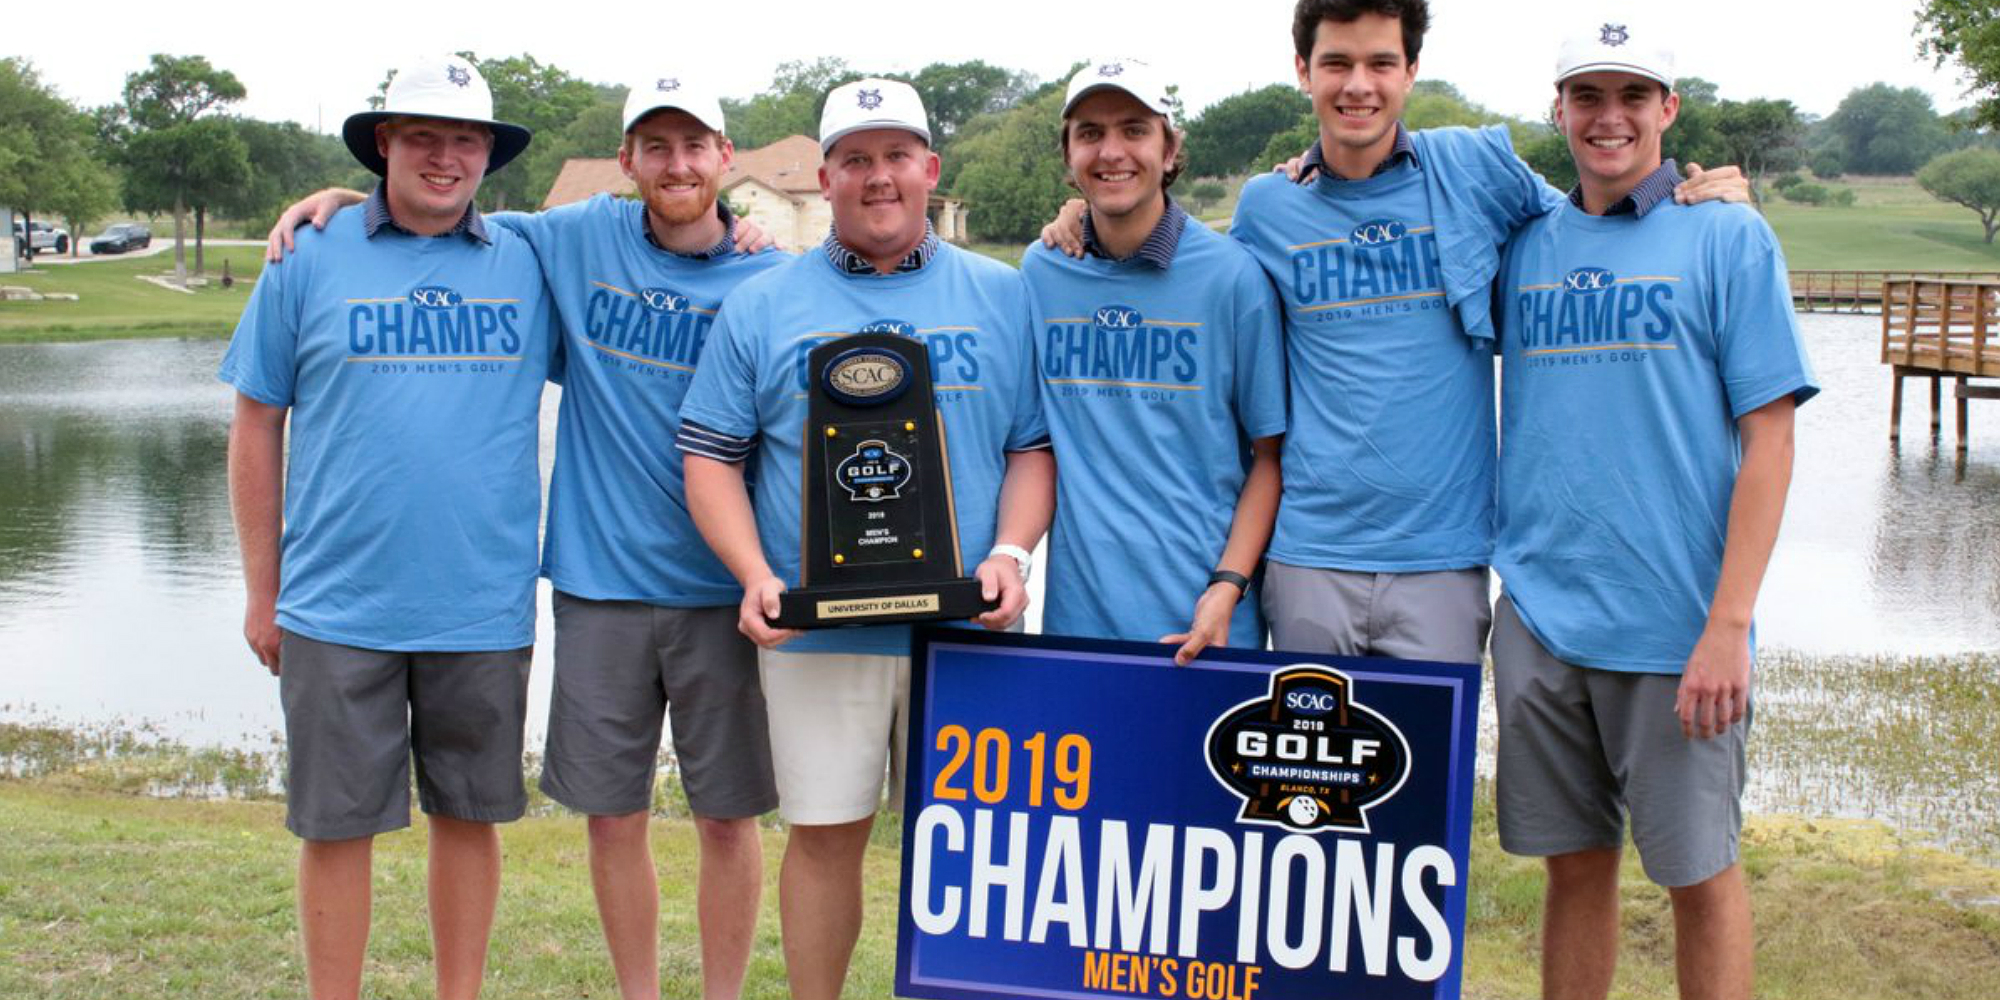 Crusaders Capture 1st SCAC Title in School History; Montalvo and Hamm Tie 2nd at 2019 Men's Golf Championship